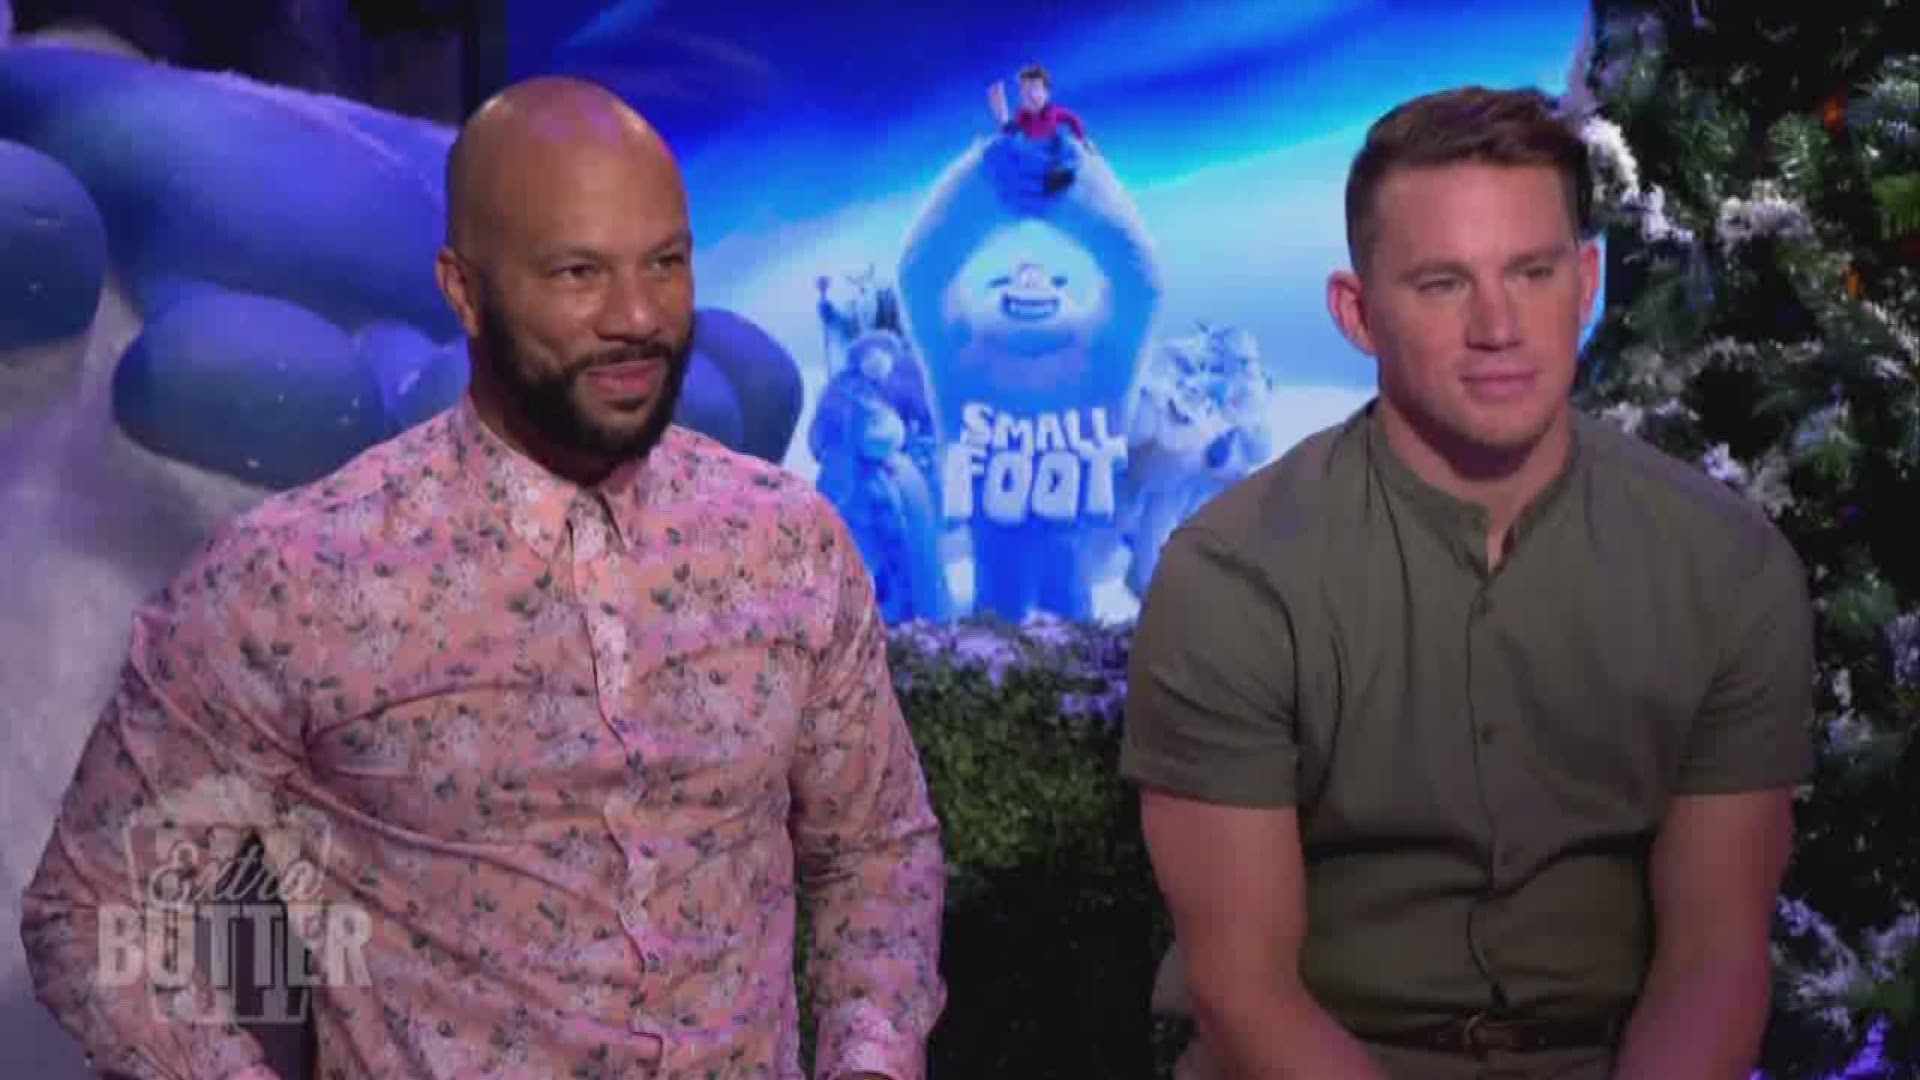 Mark S. Allen talks with the stars of 'Small Foot' including Channing Tatum and Common.